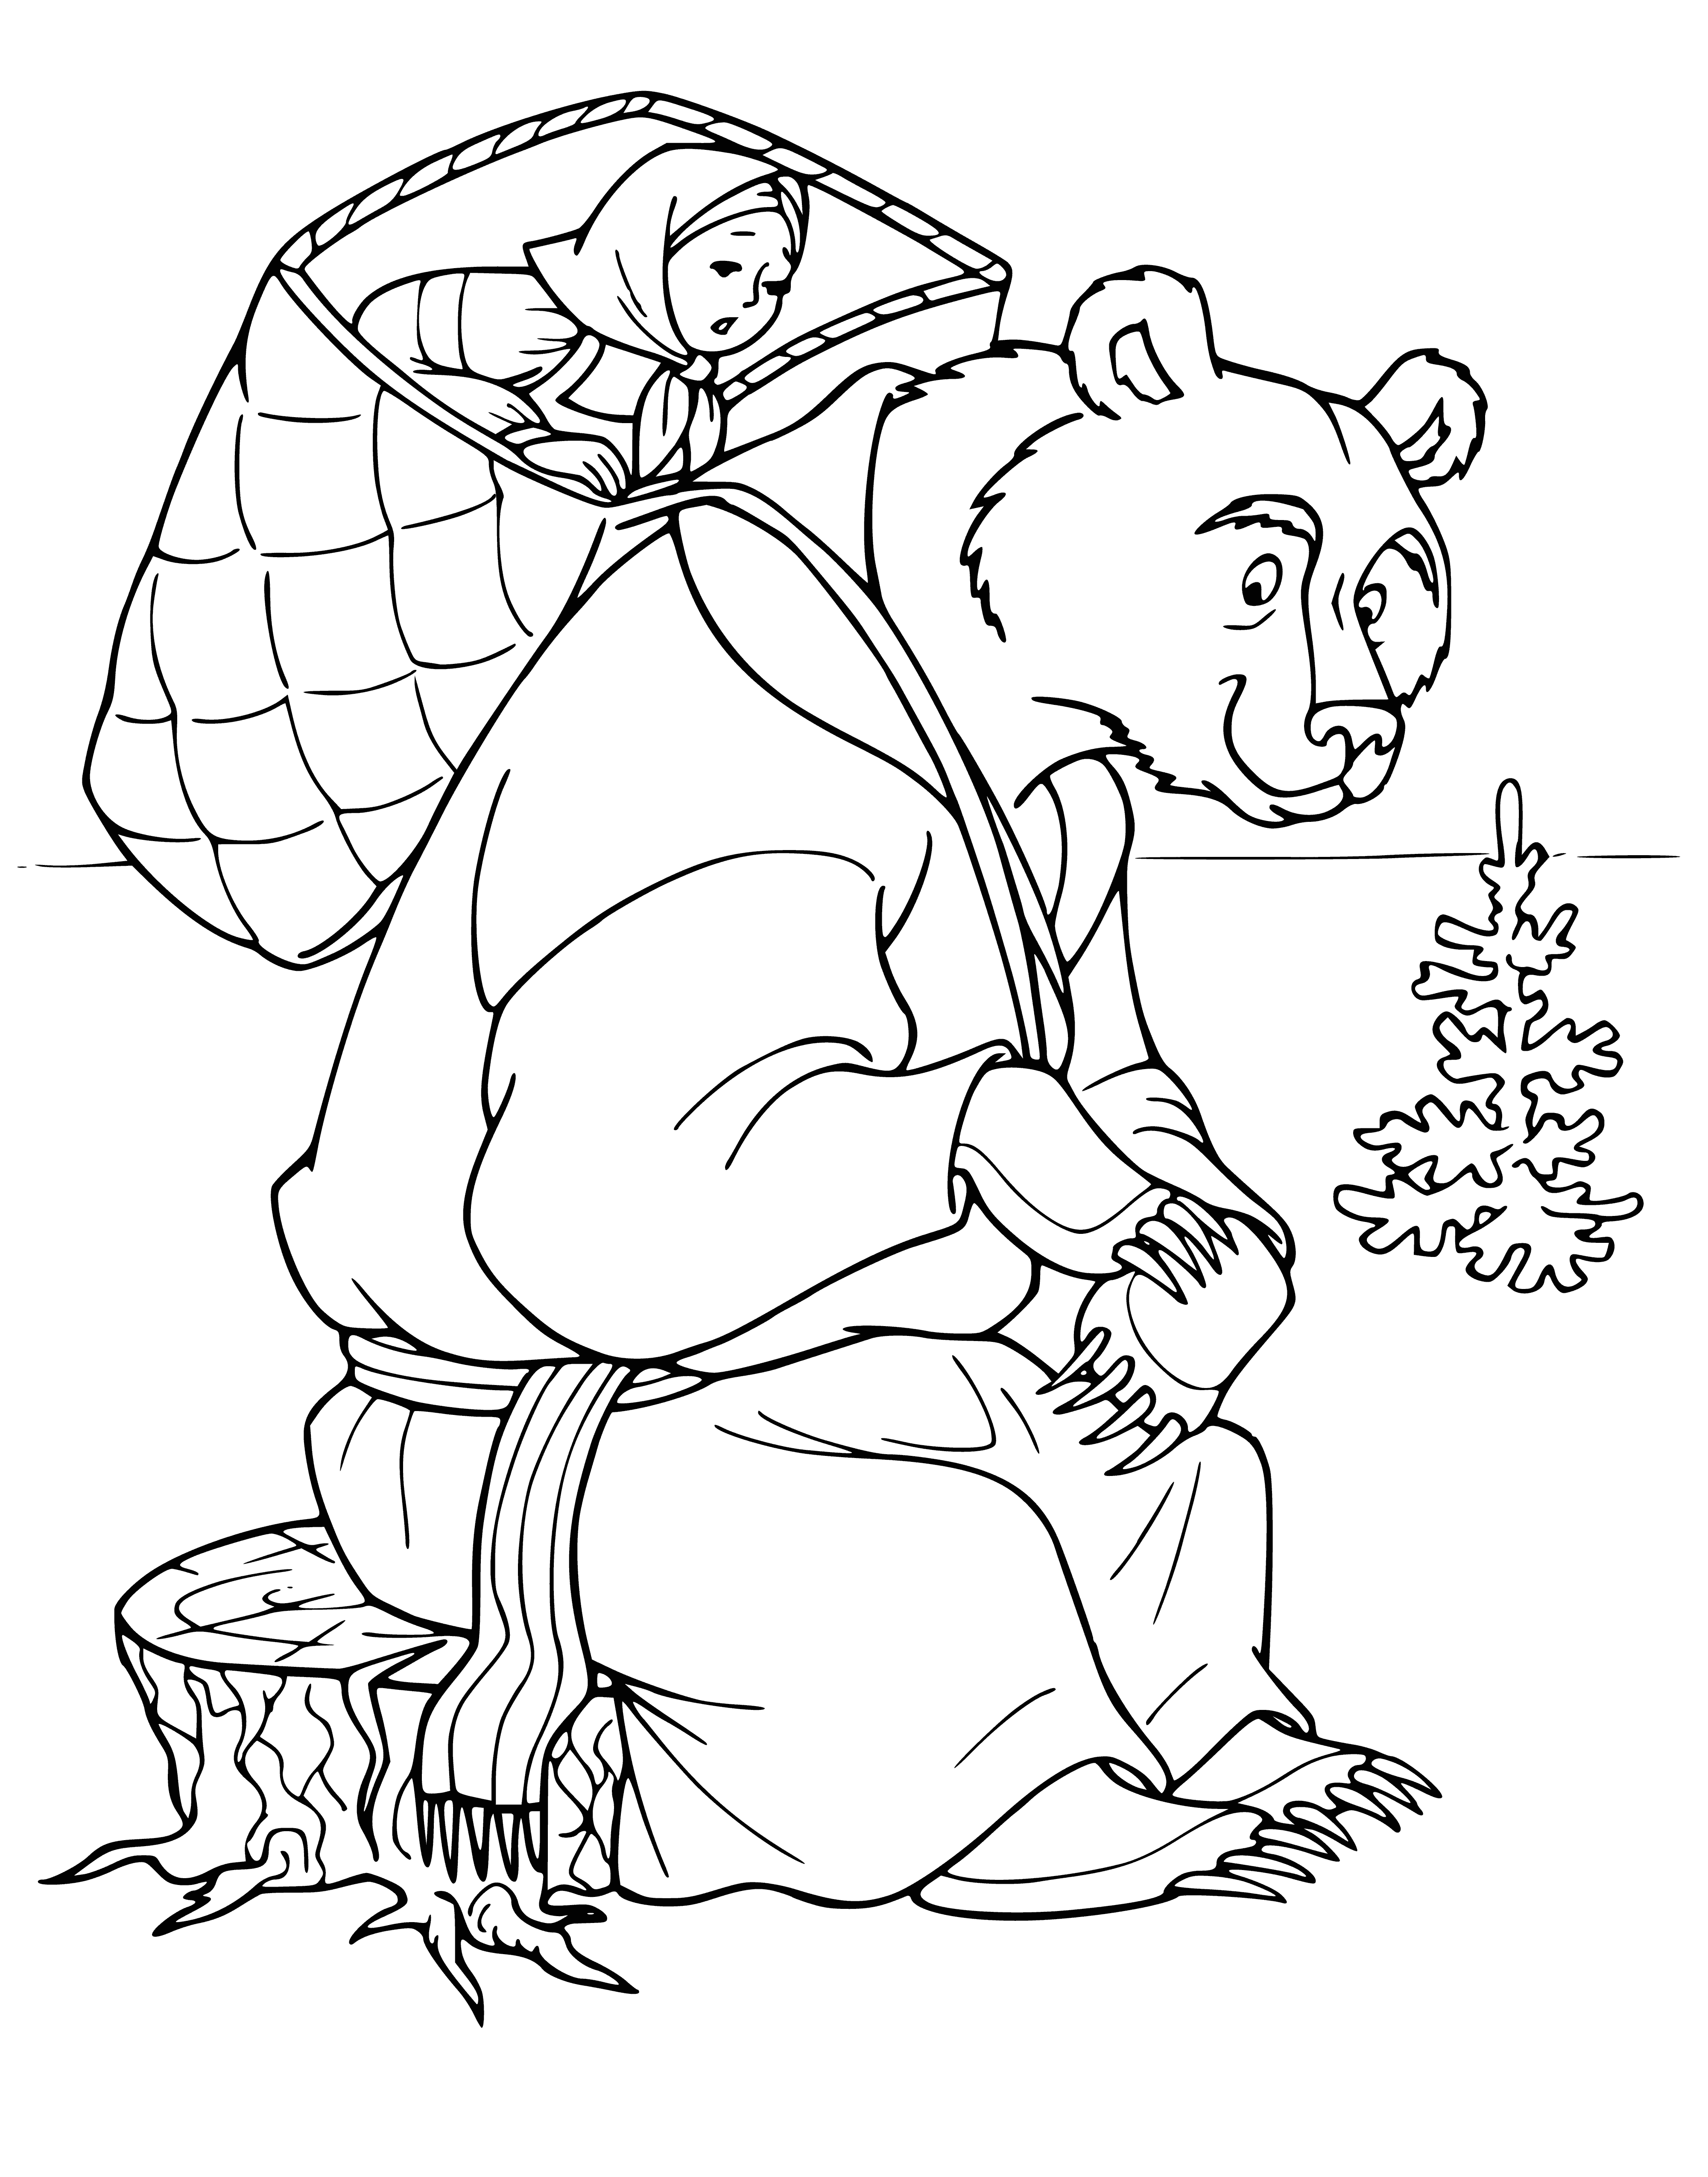 coloring page: A bear is stuck on a stump, waiting for help. He looks harmless but could hurt someone.